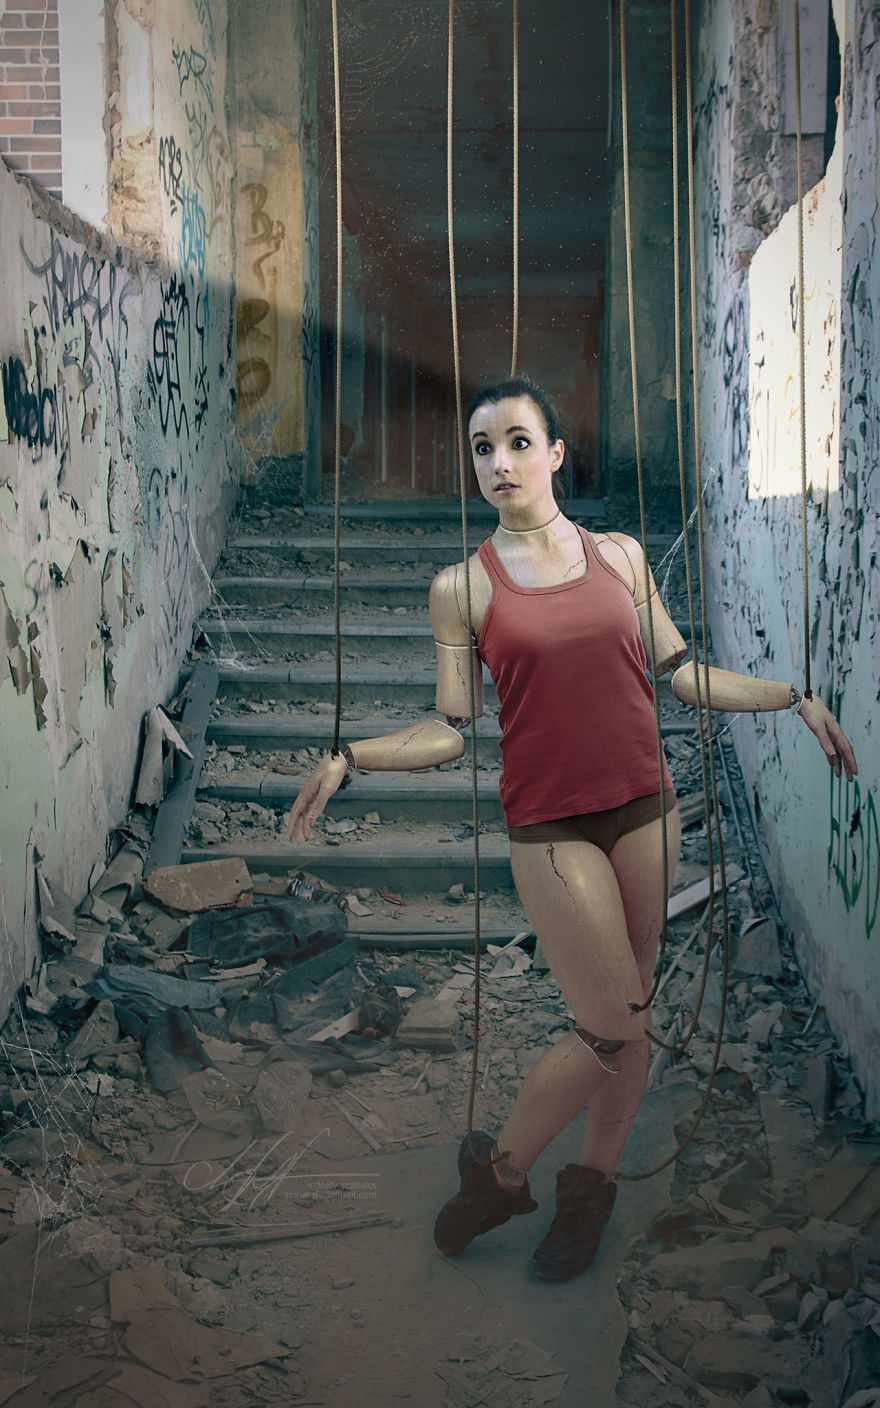 I Found This Marionette In An Abandoned Warehouse